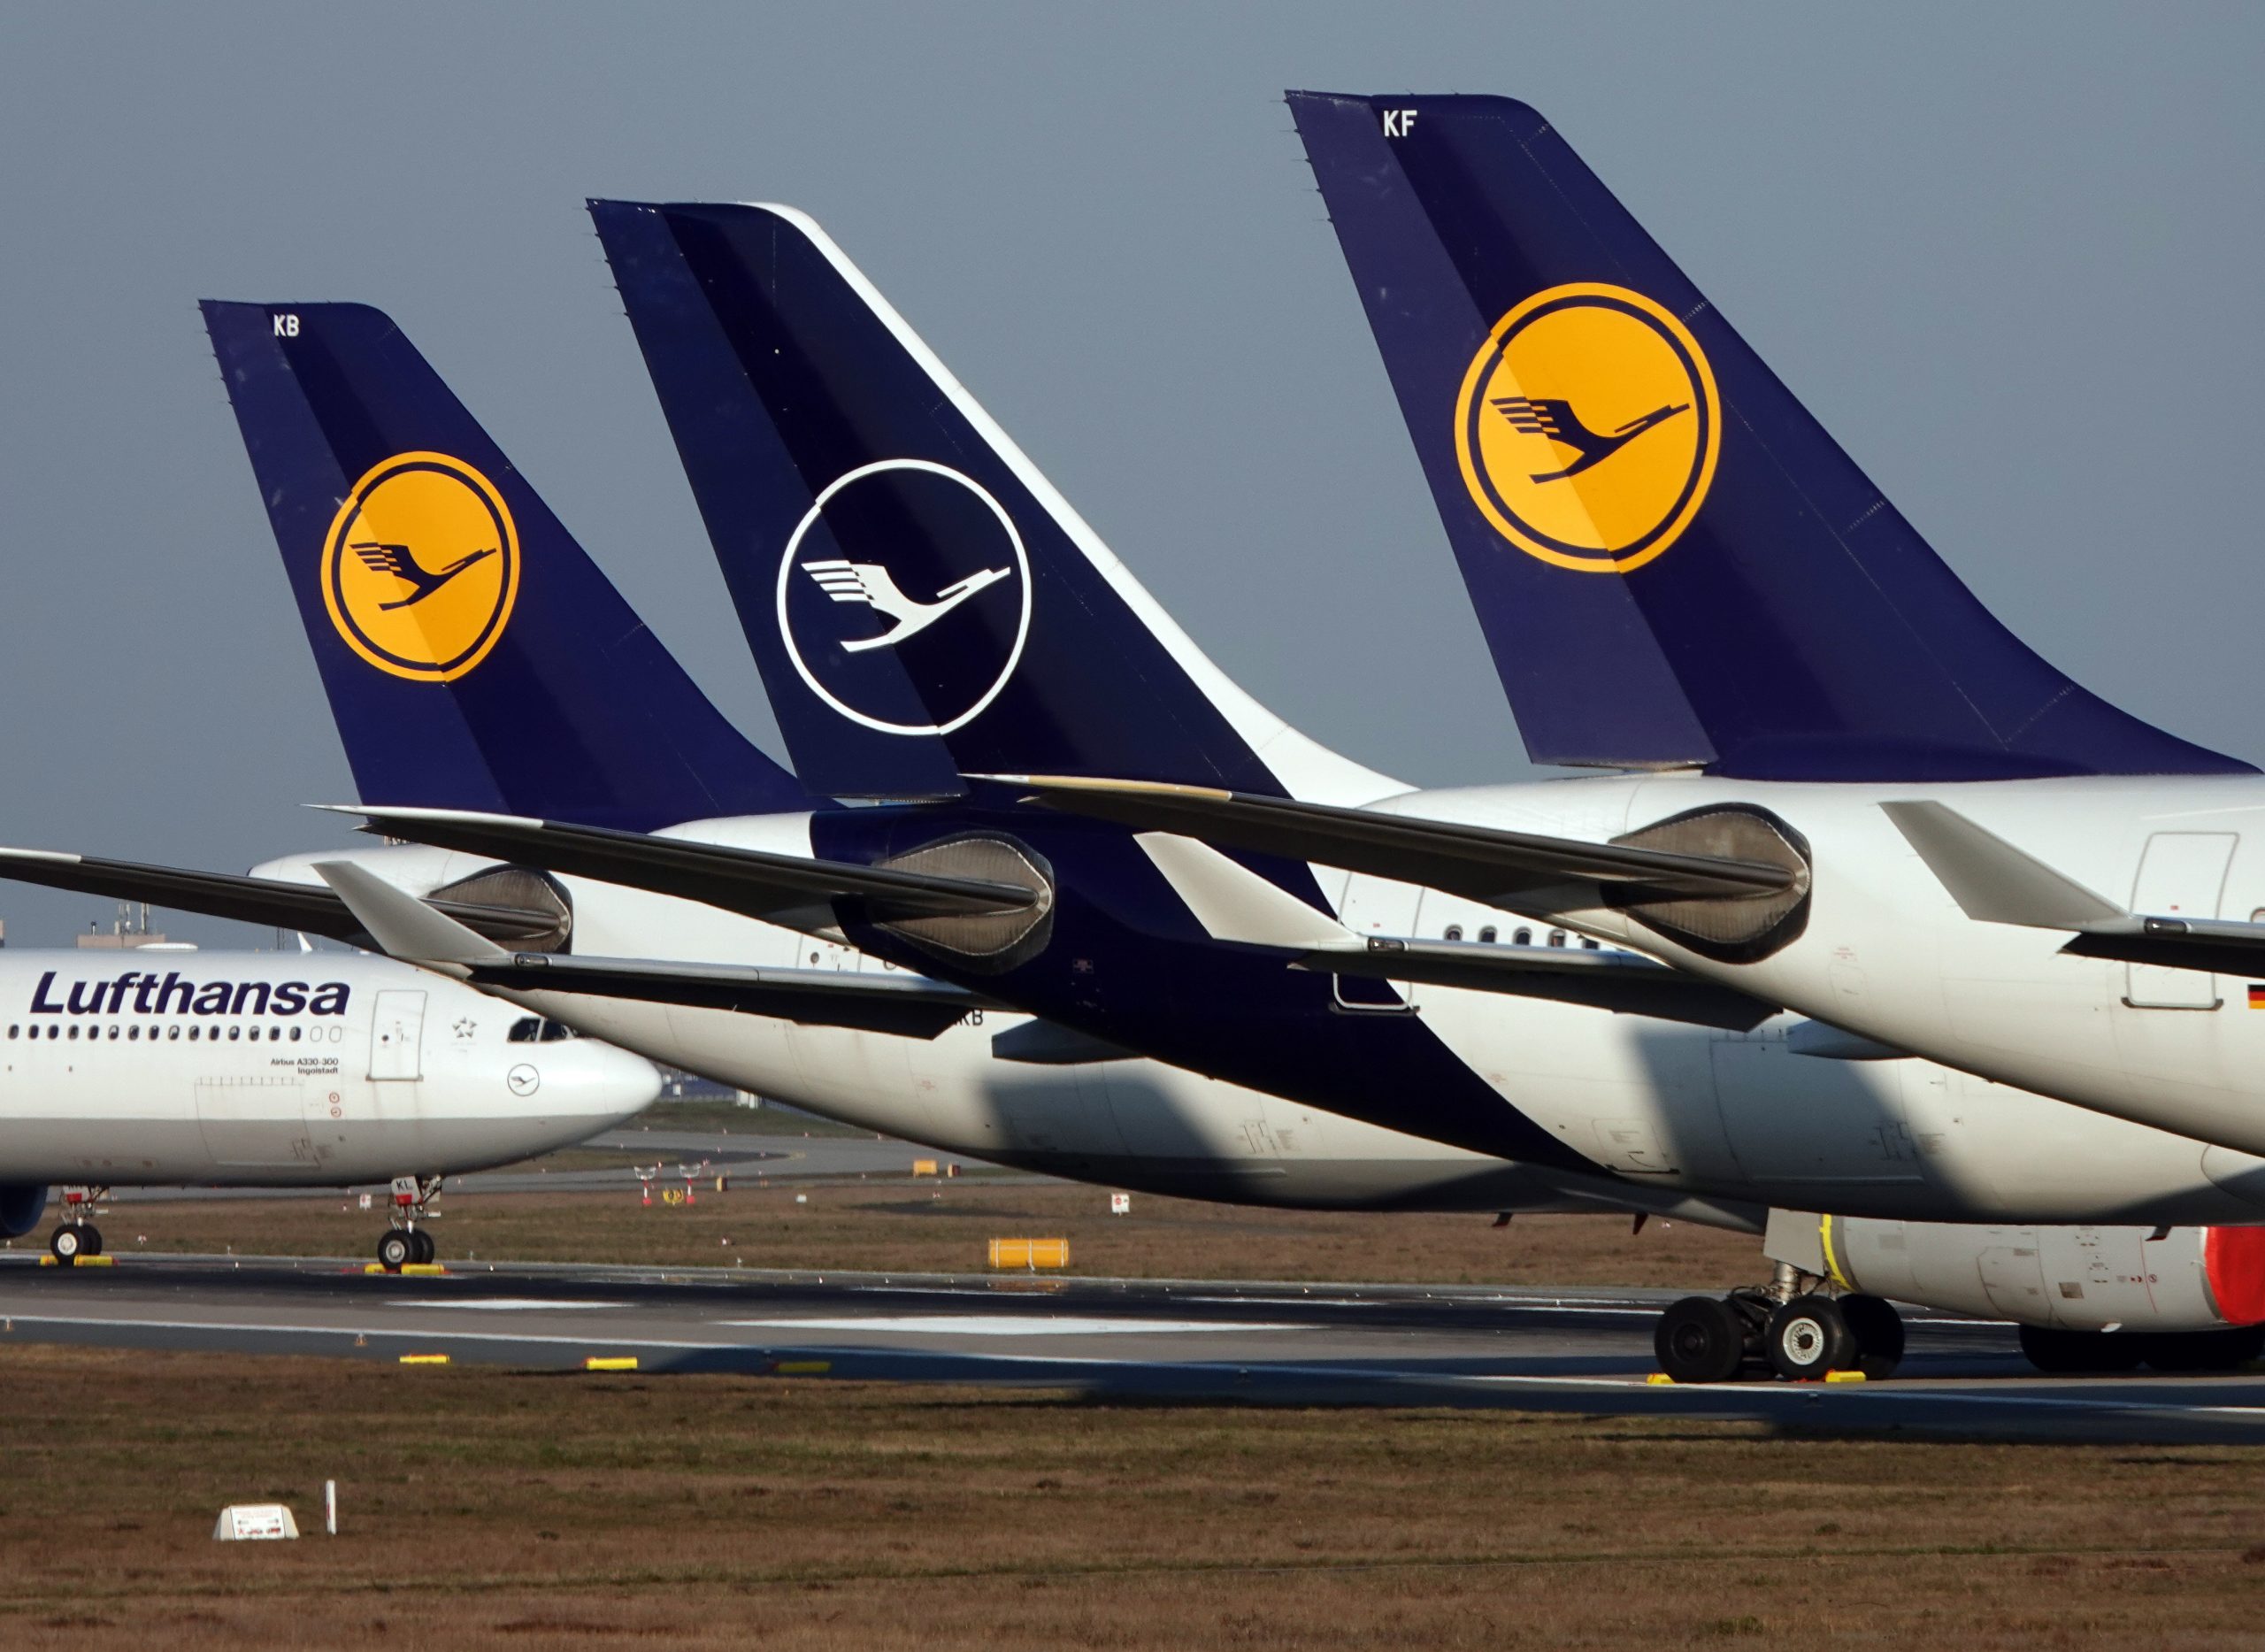 epa09050635 (FILE) Lufthansa passenger planes parked at Frankfurt airport's northern runway in Frankfurt, Germany, 25 March 2020 (reissued 04 March 2021). Lufthansa Group in a statement on 04 March 2021 reported a 5.5 billion euro operating loss in 2020, mostly due to the ongoing coronavirus Covid-19 pandemic.  EPA/MAURITZ ANTIN *** Local Caption *** 56475375